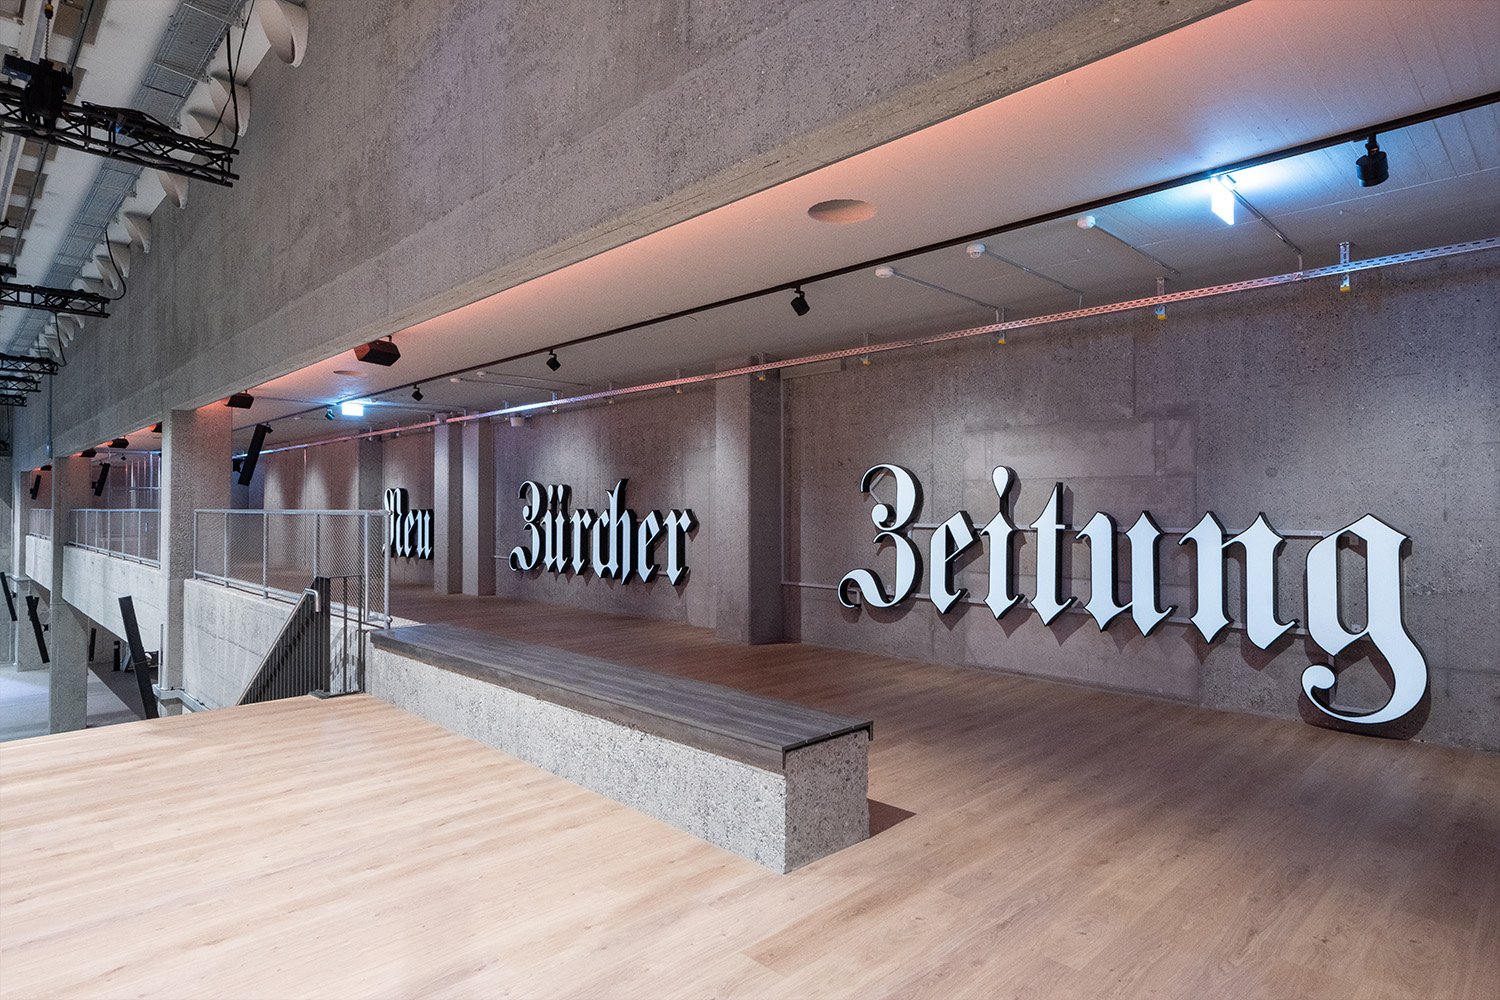 The logo of «Neue Zürcher Zeitung» pays homage to the history of the hall. | Daniel Werder